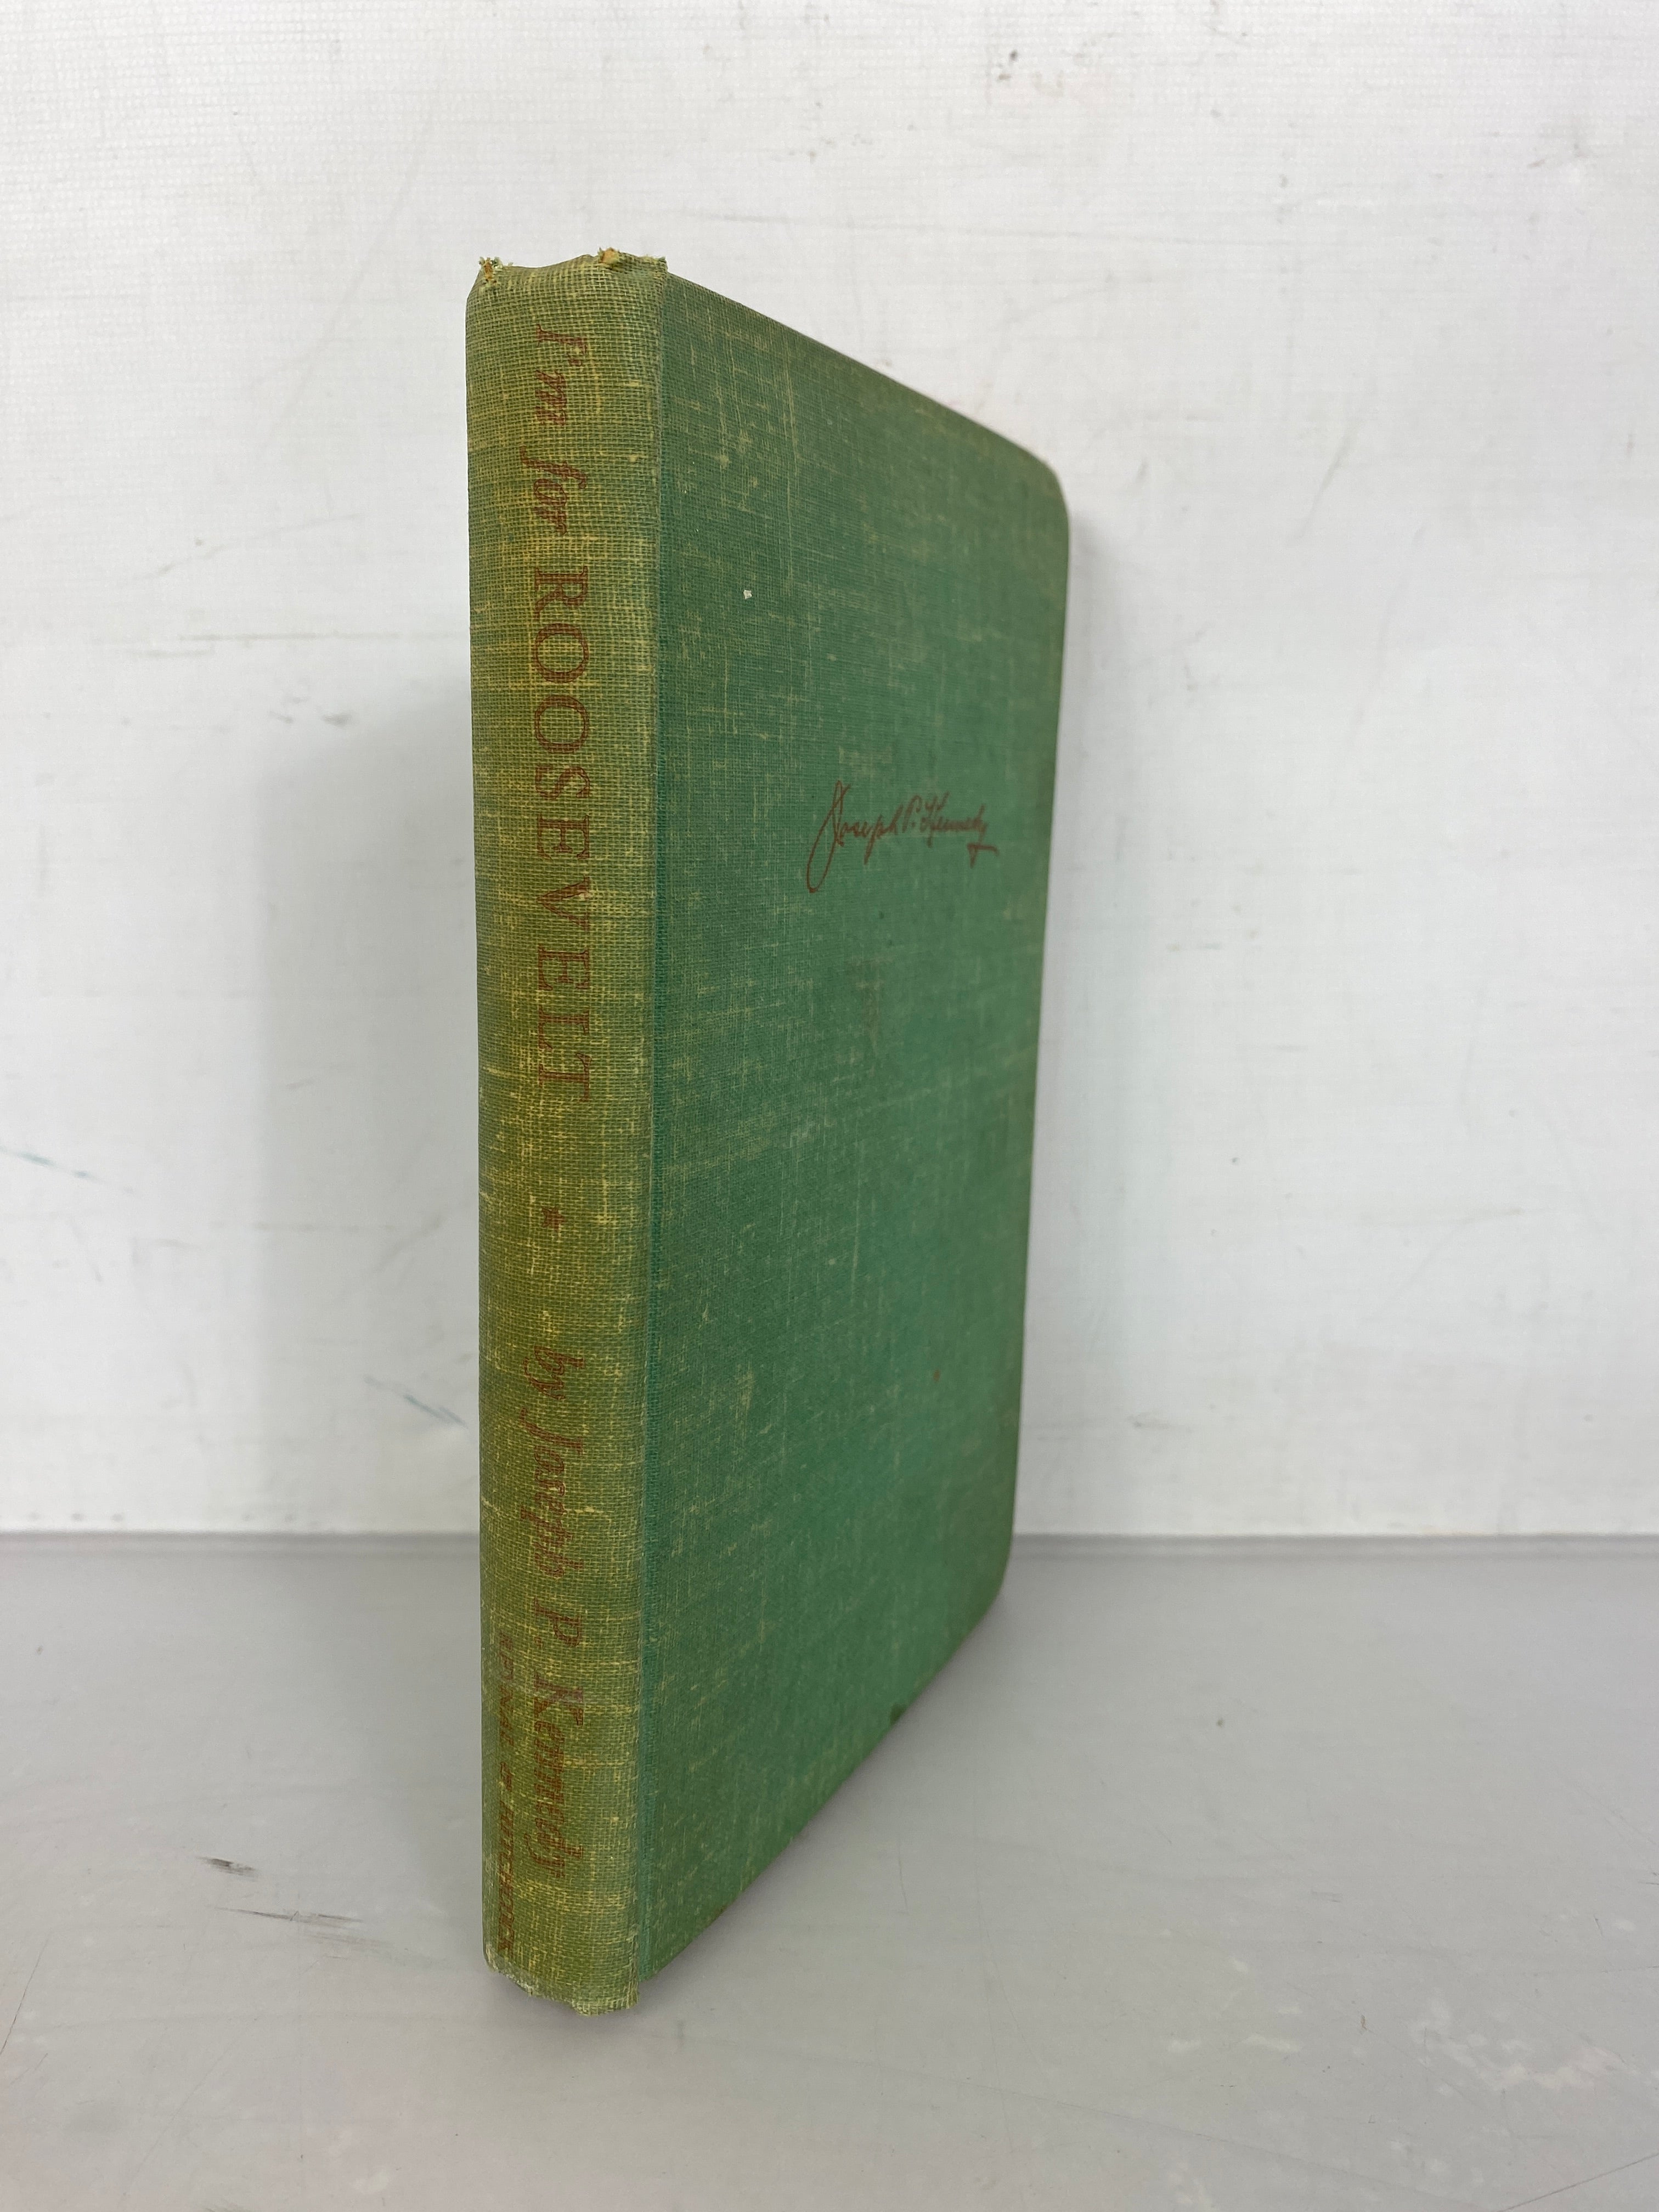 I'm For Roosevelt by Joseph P. Kennedy 1936 First Edition HC